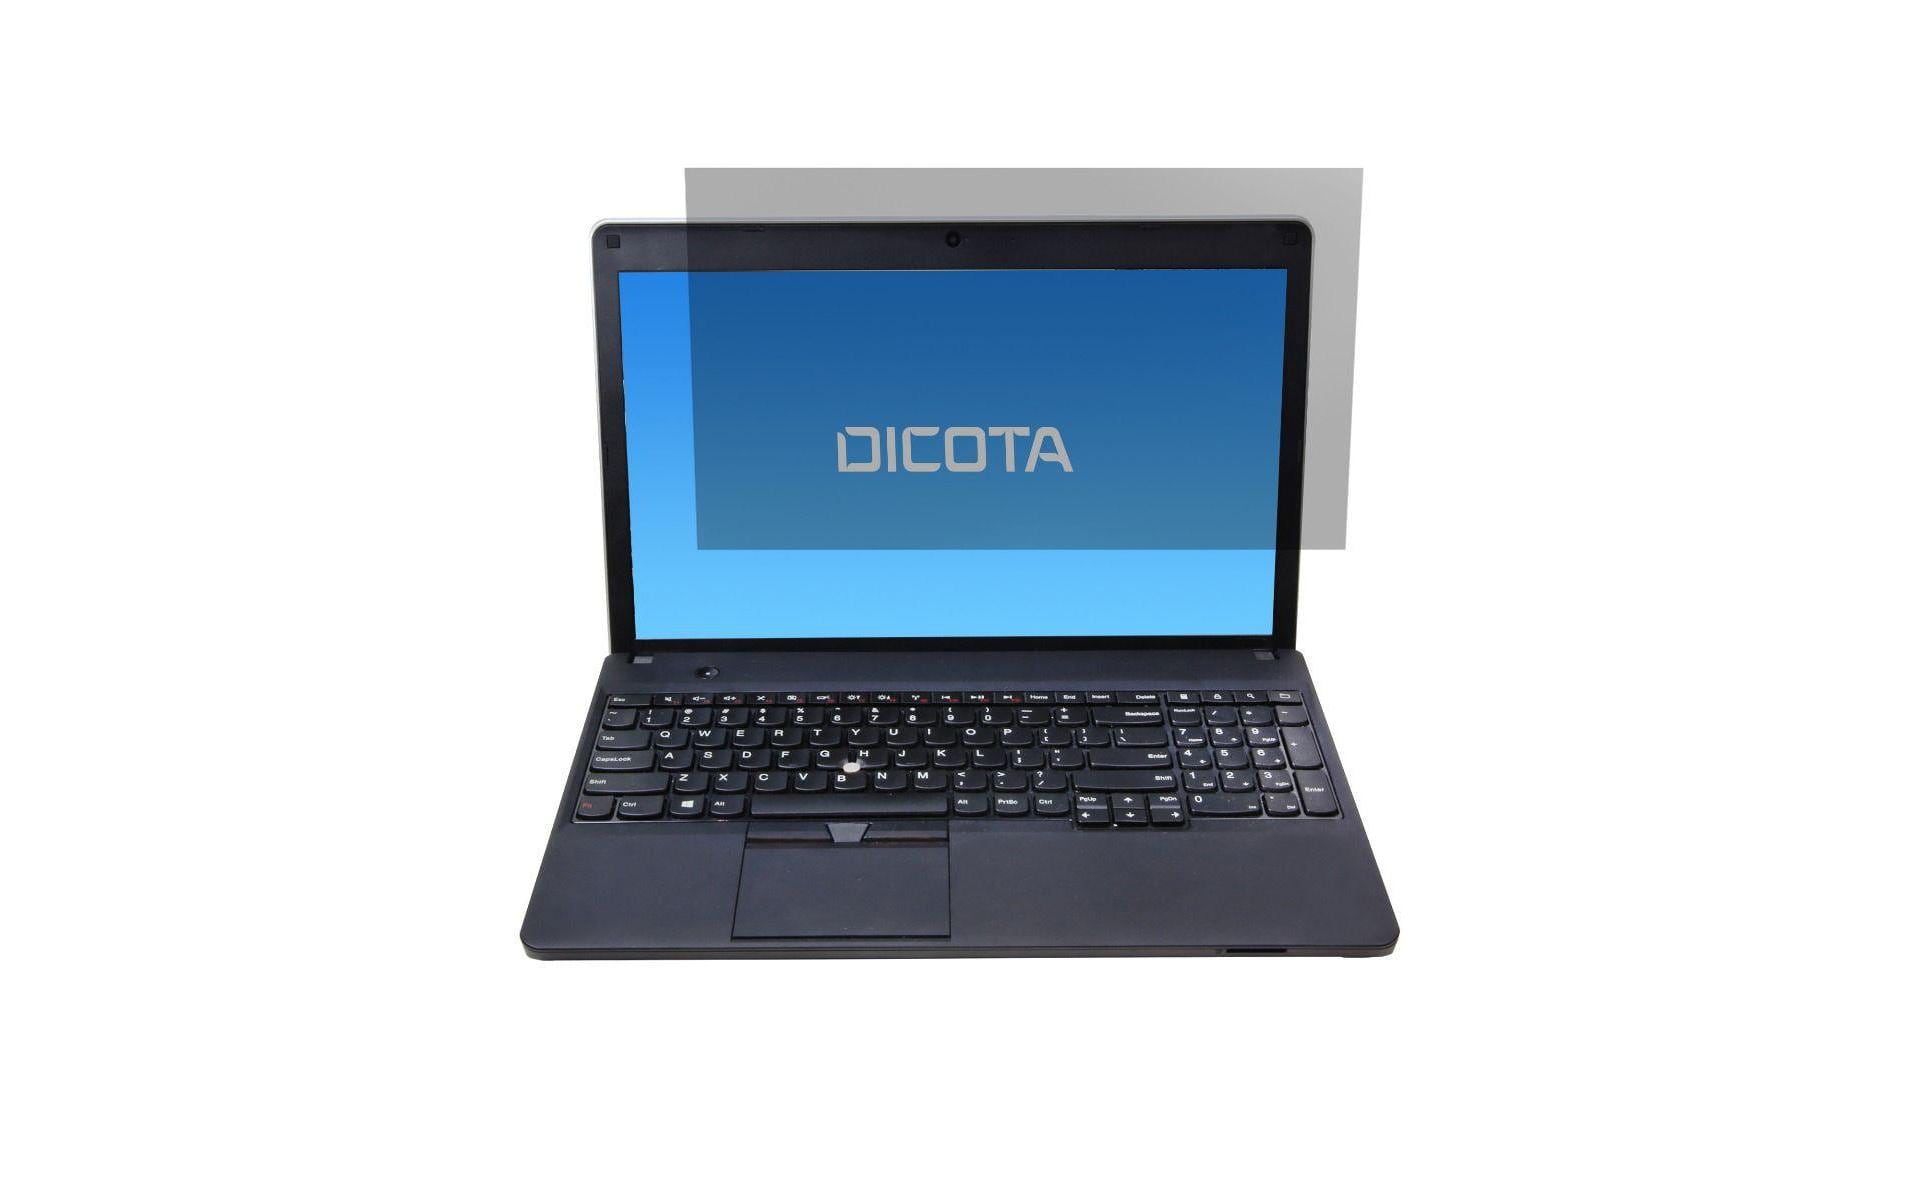 DICOTA Privacy Filter 4-Way side-mounted 13.3 / 16:9